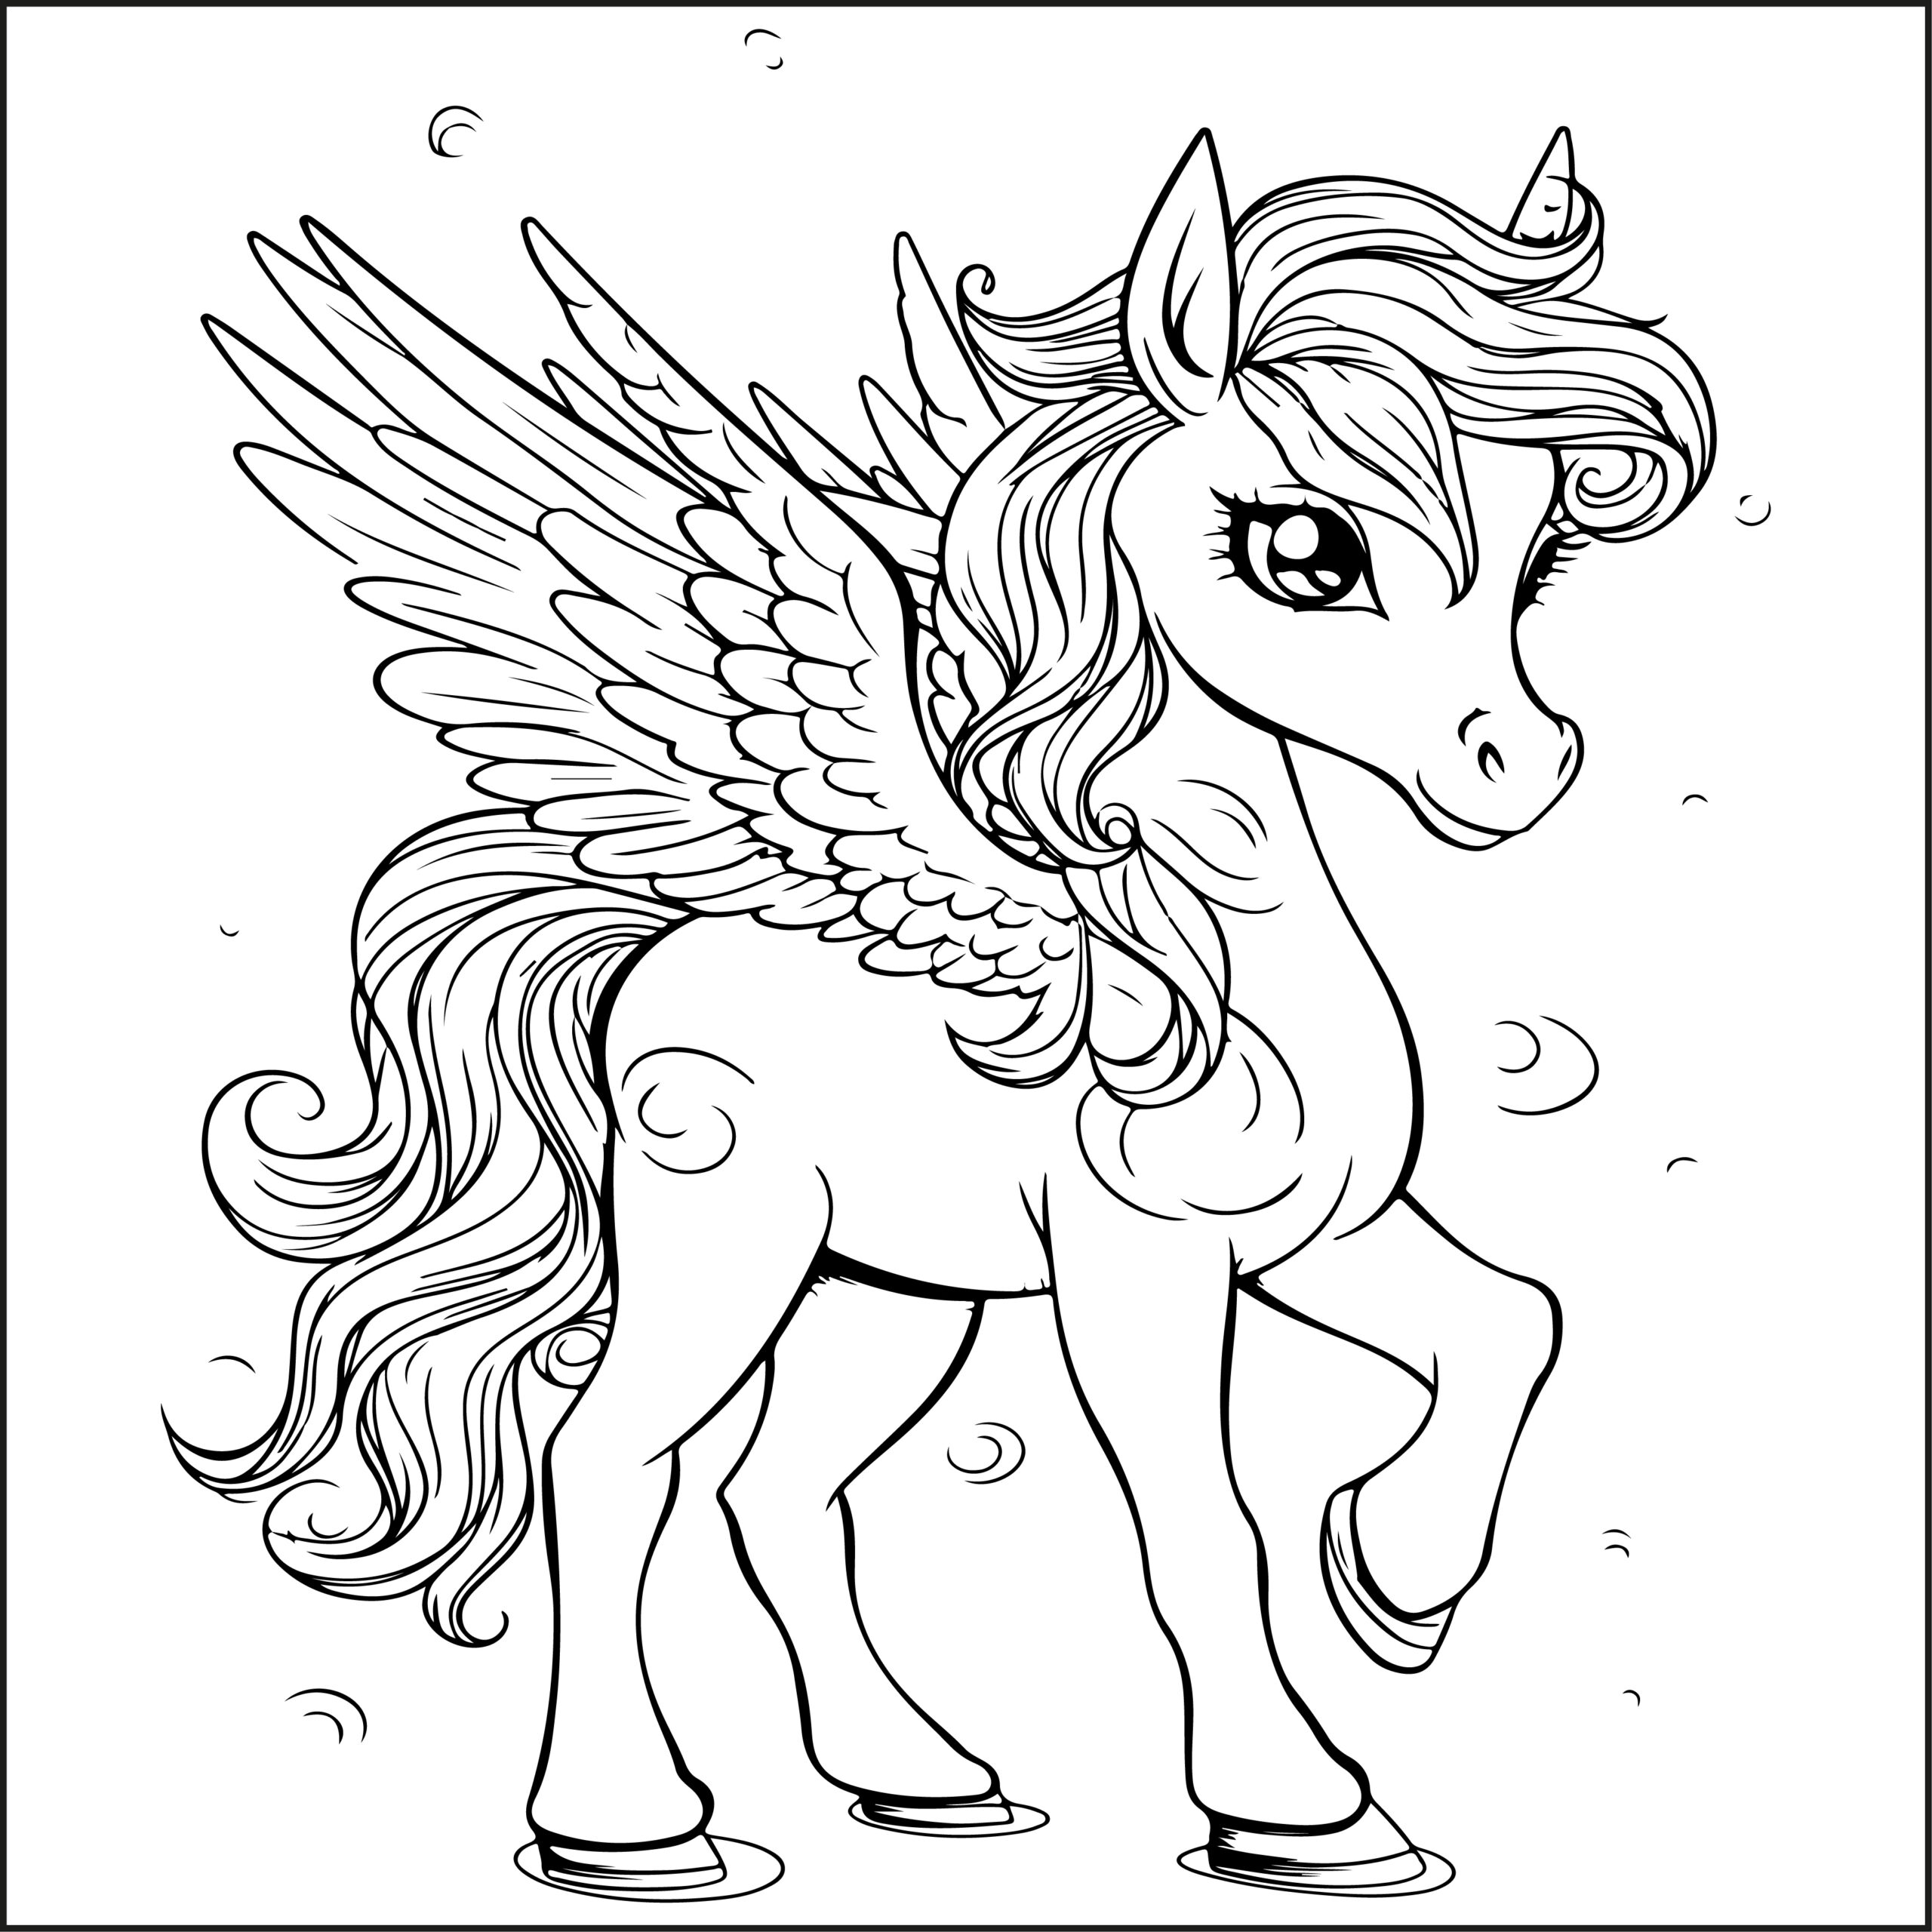 Pegasus coloring book pegasus coloring pages for kids made by teachers